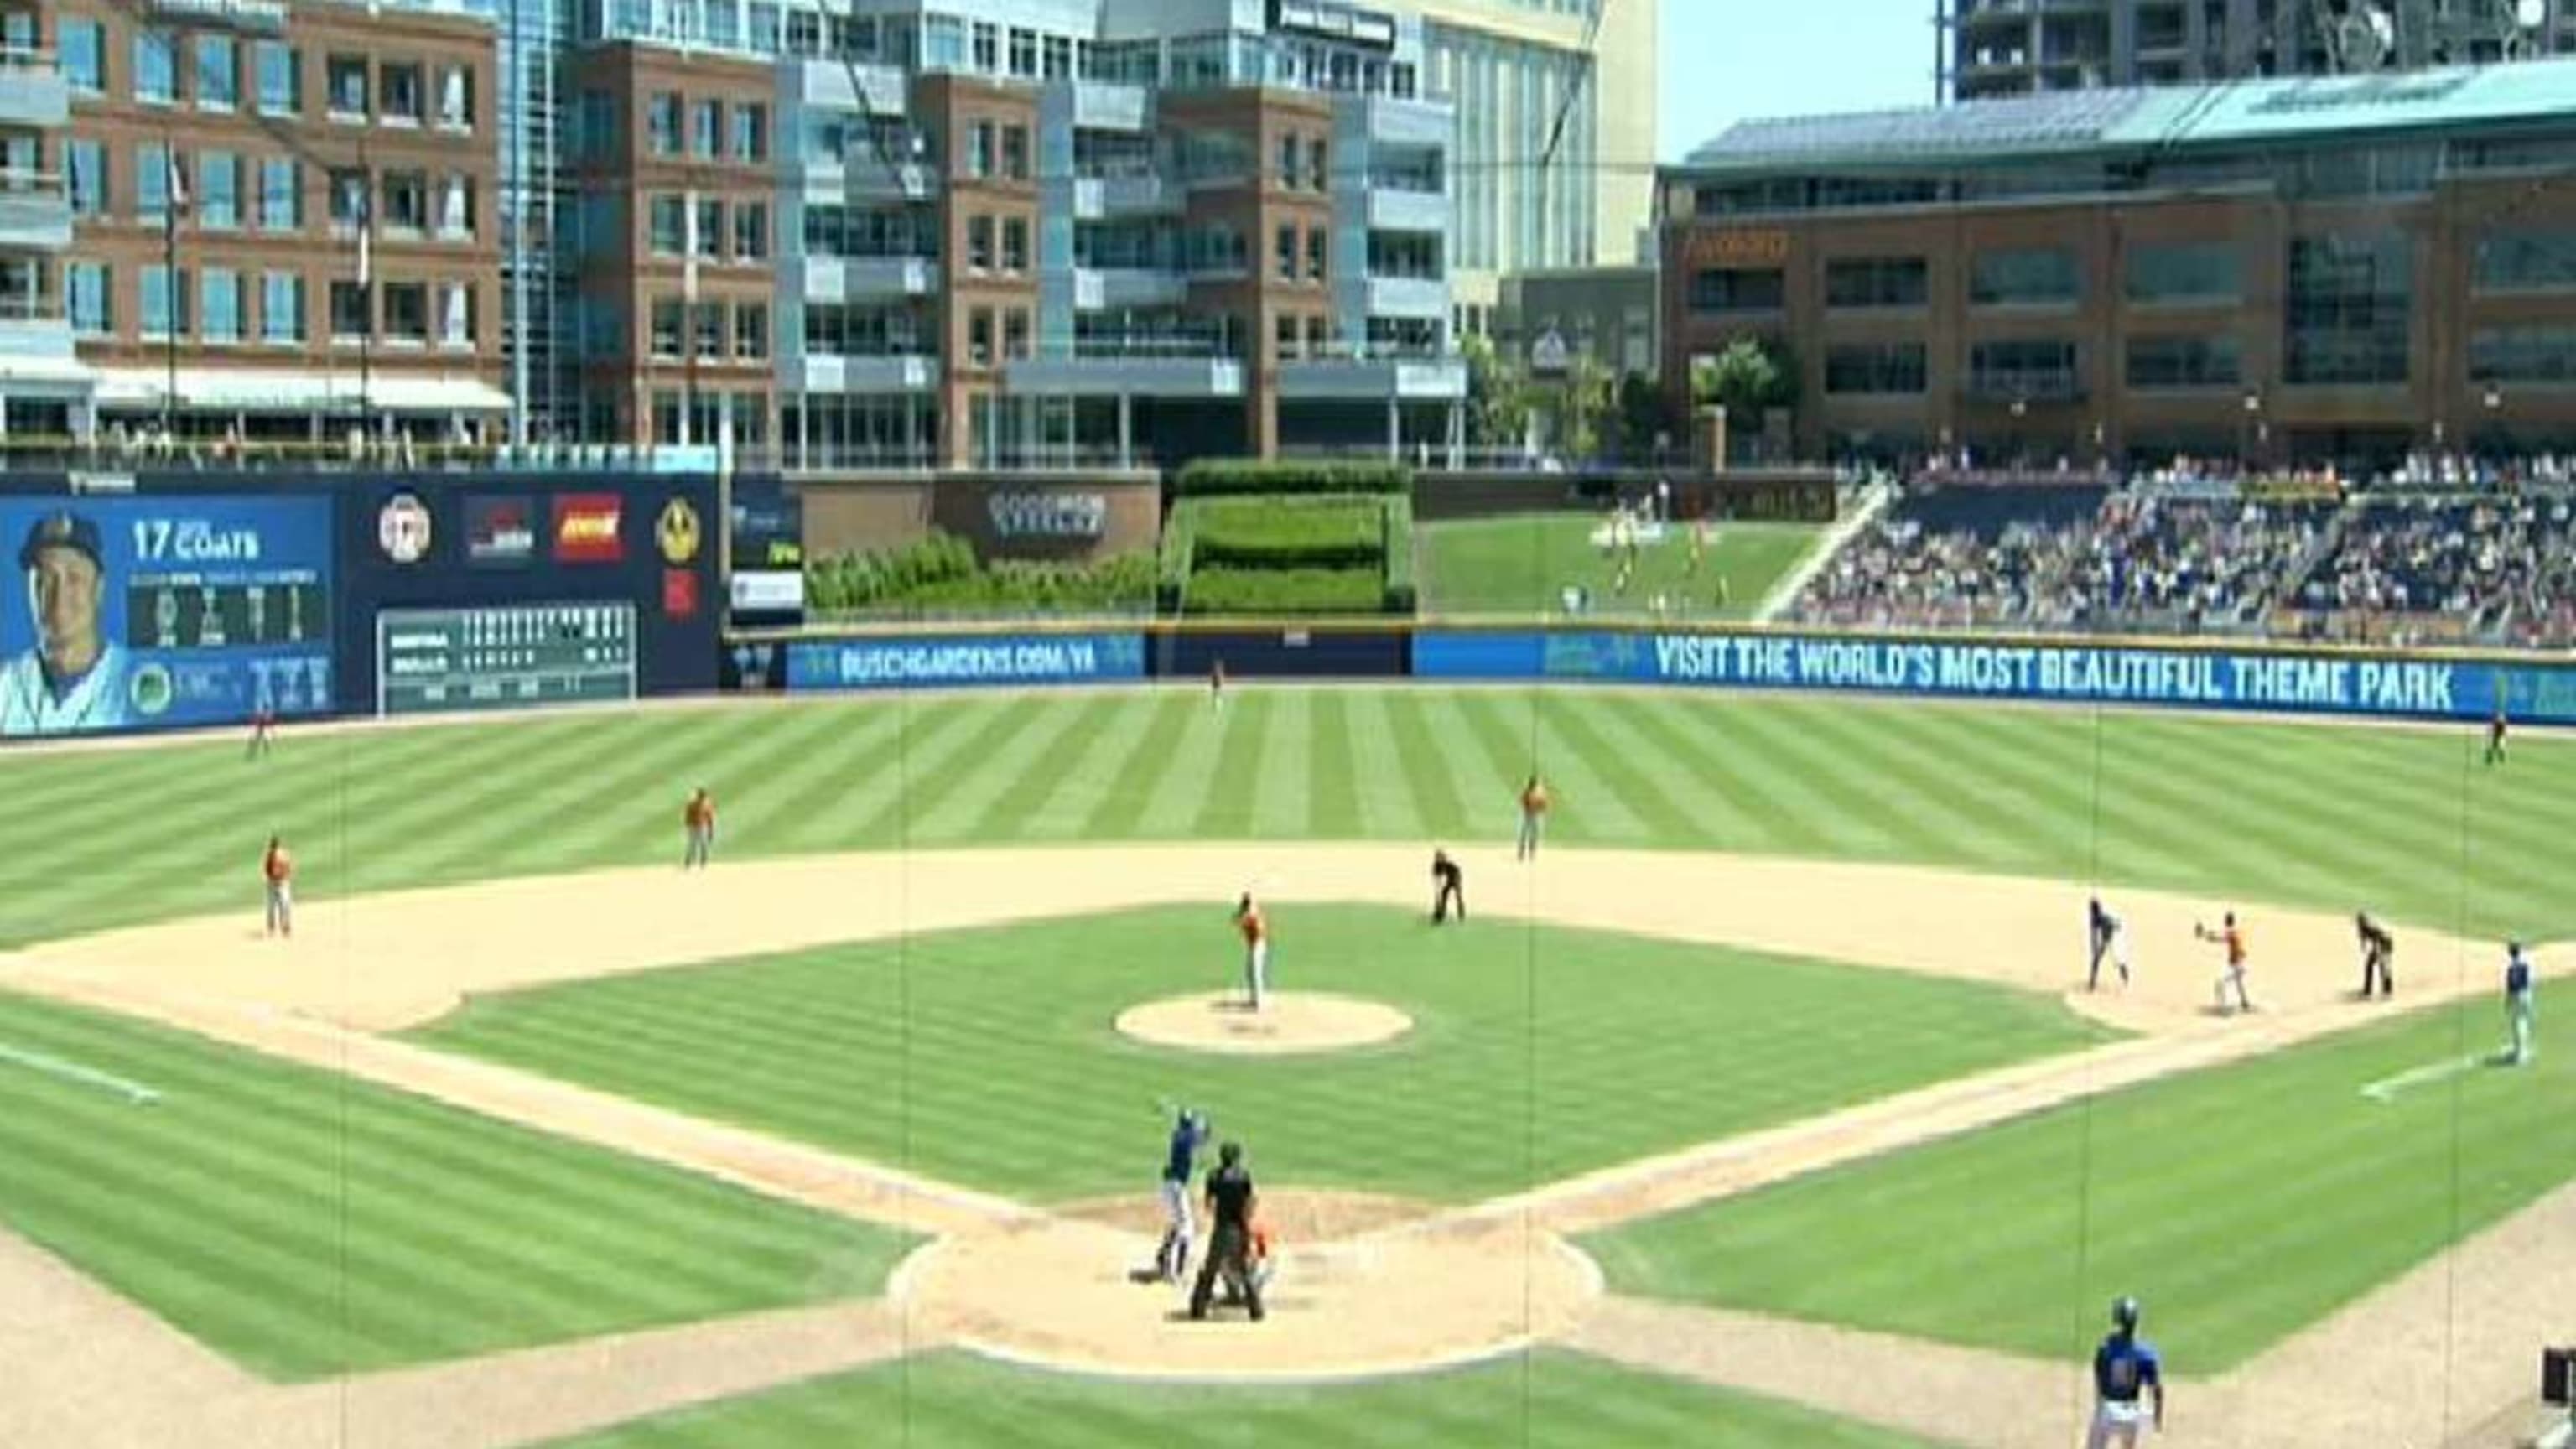 Durham Bulls mark 20th anniversary of affiliation with Tampa Bay